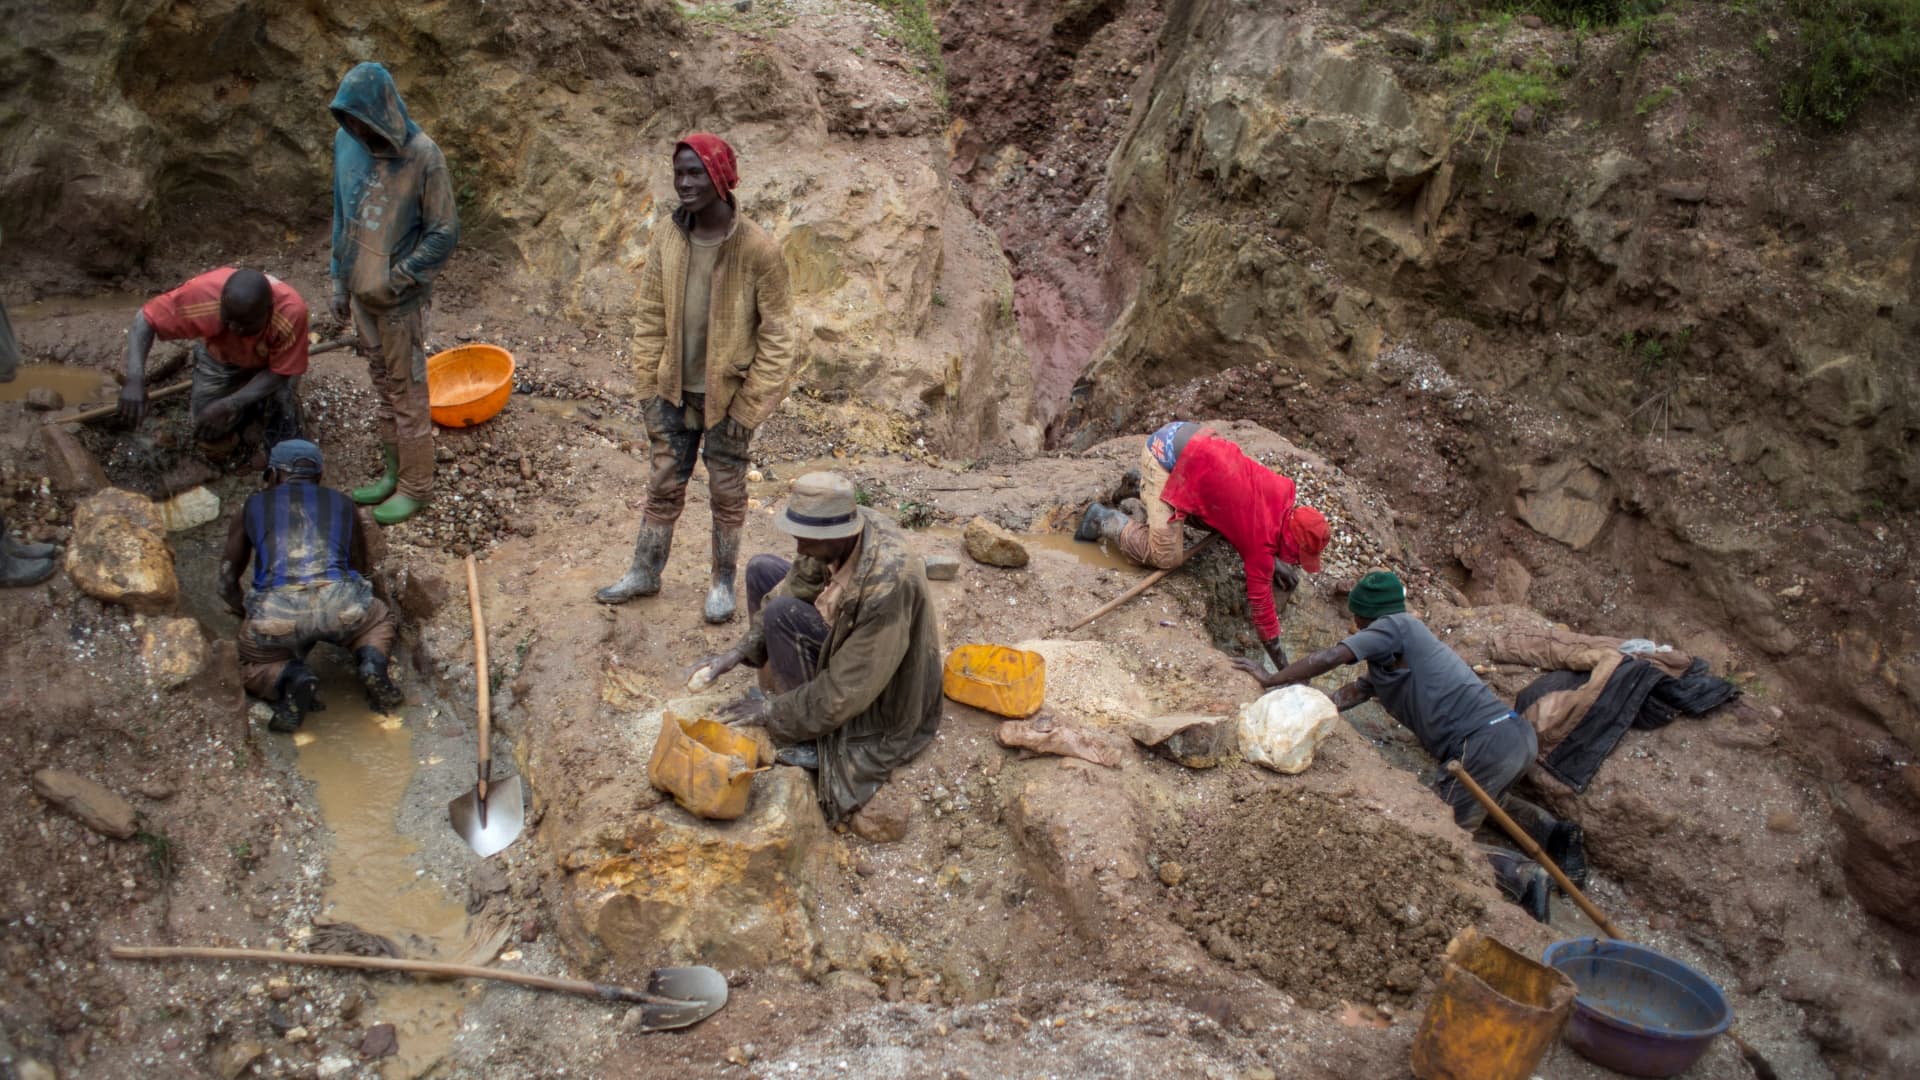 Artisanal miners in the South Kivu Province of the Democratic Republic of the Congo mining cassiterite, the primary ore of tin.